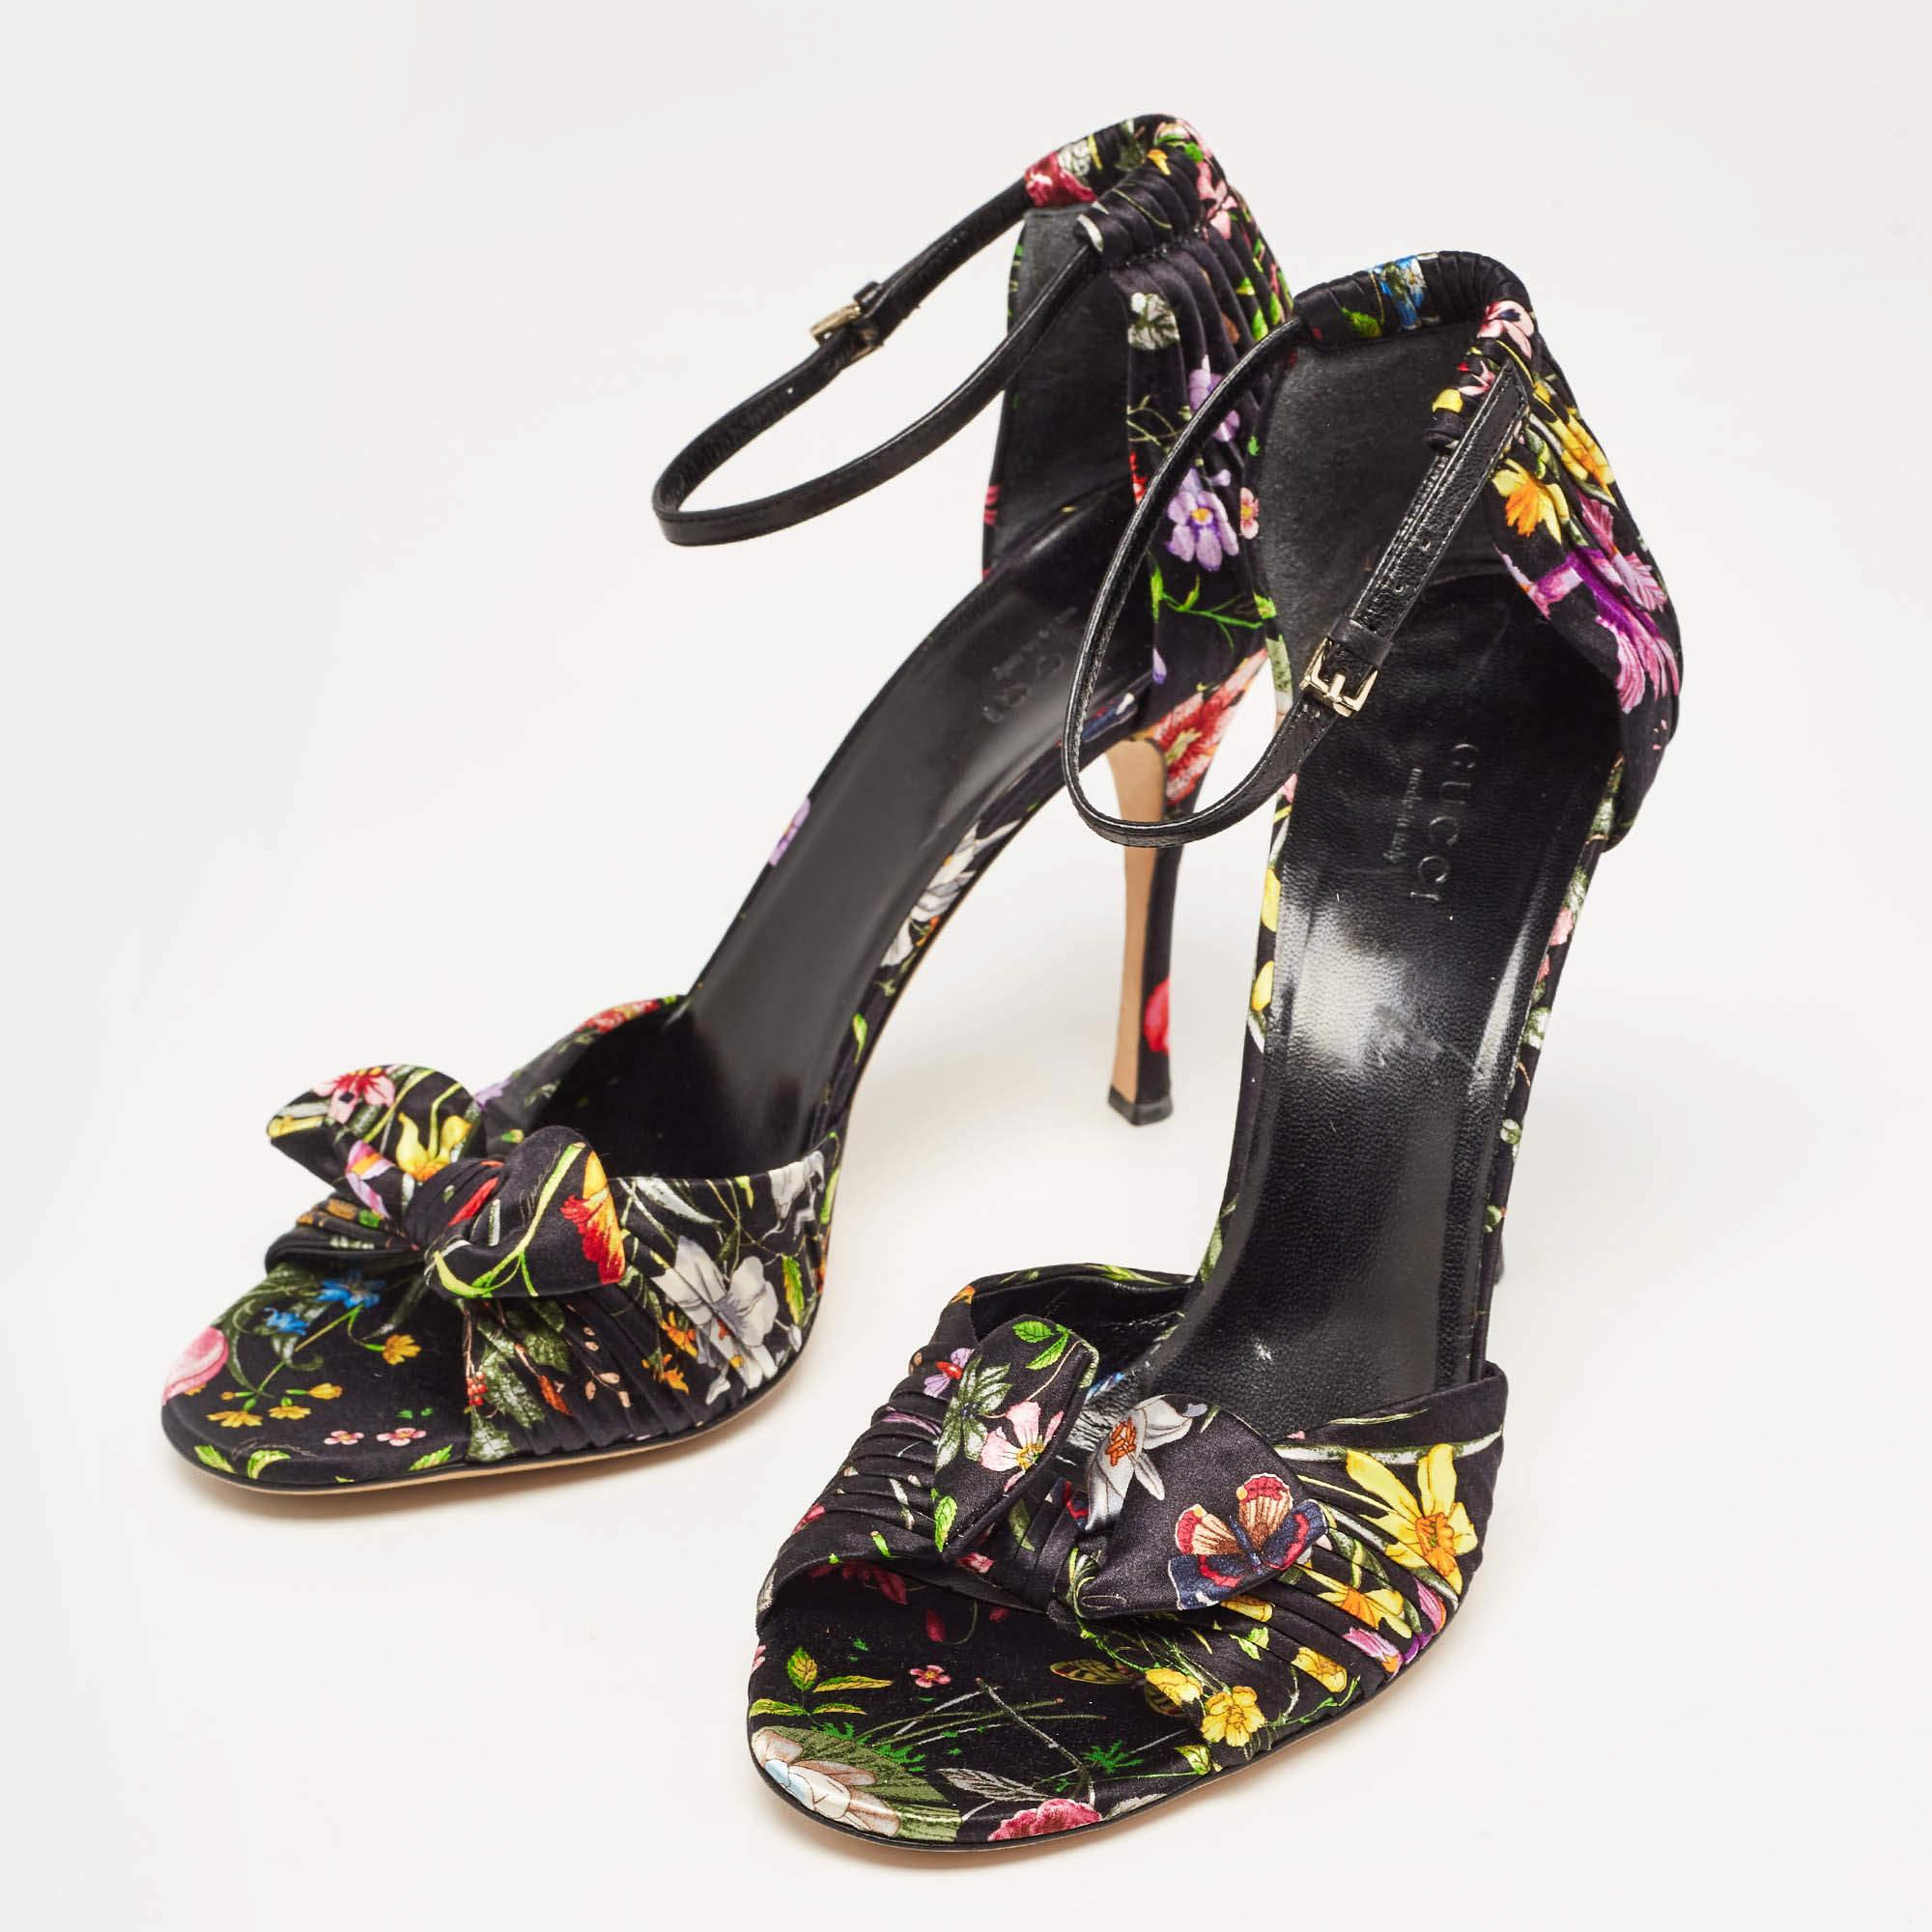 Gucci Black Floral Print Pleated Satin Bow Ankle Strap Sandals Size 39 5